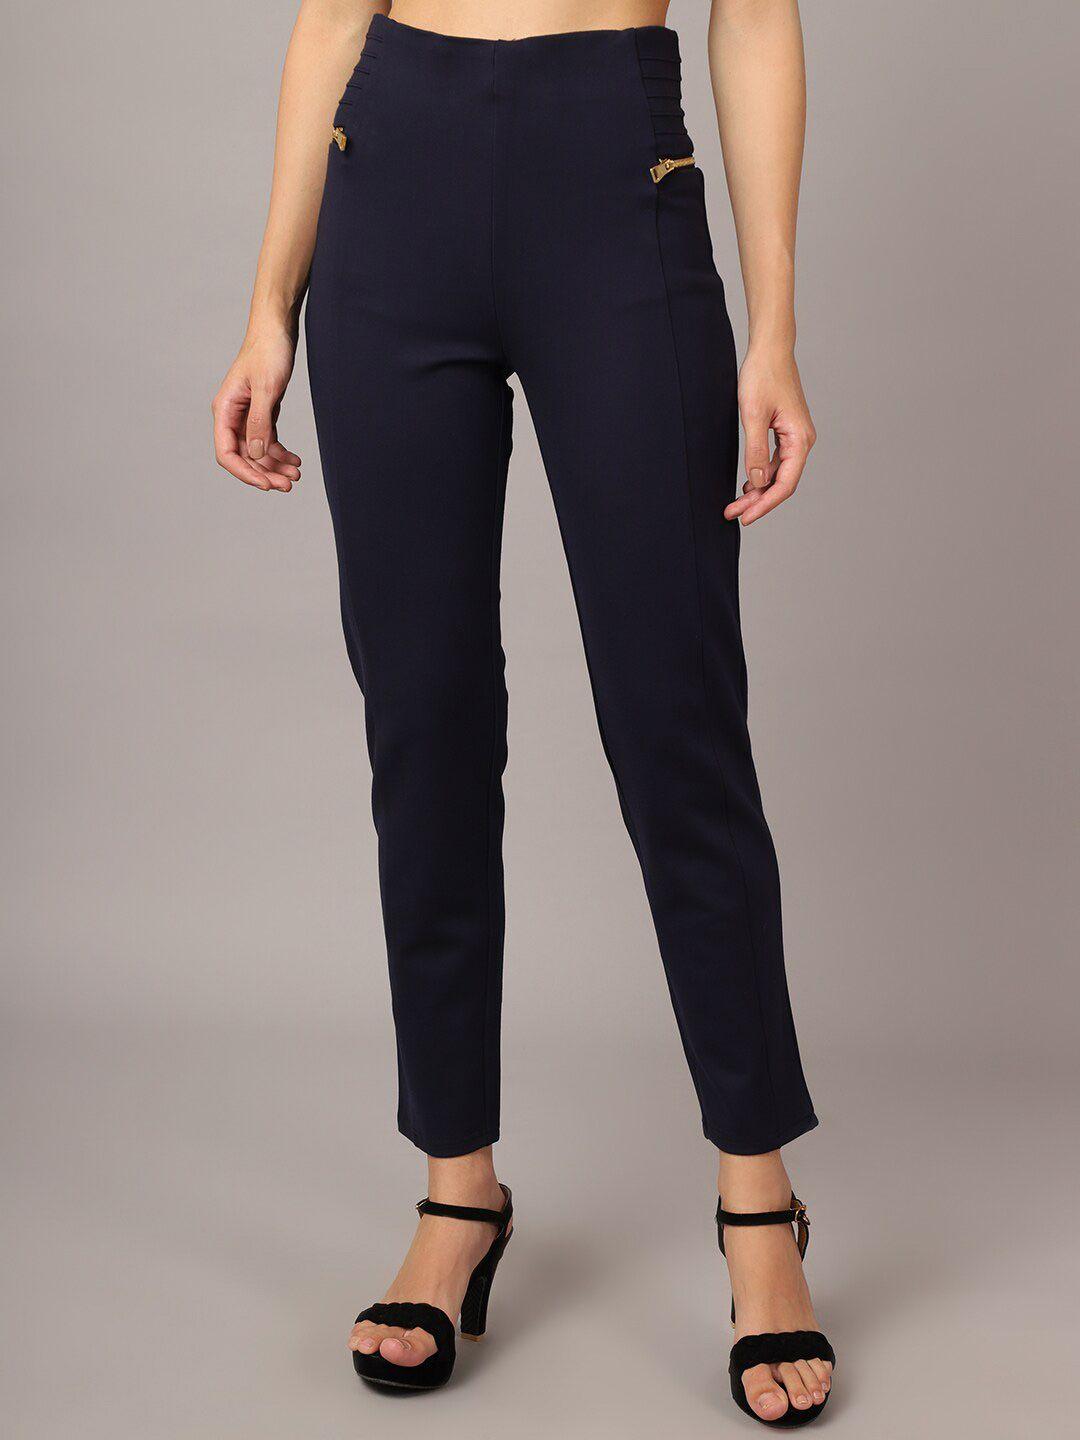 Cantabil Women Navy Blue Solid Cotton Jeggings